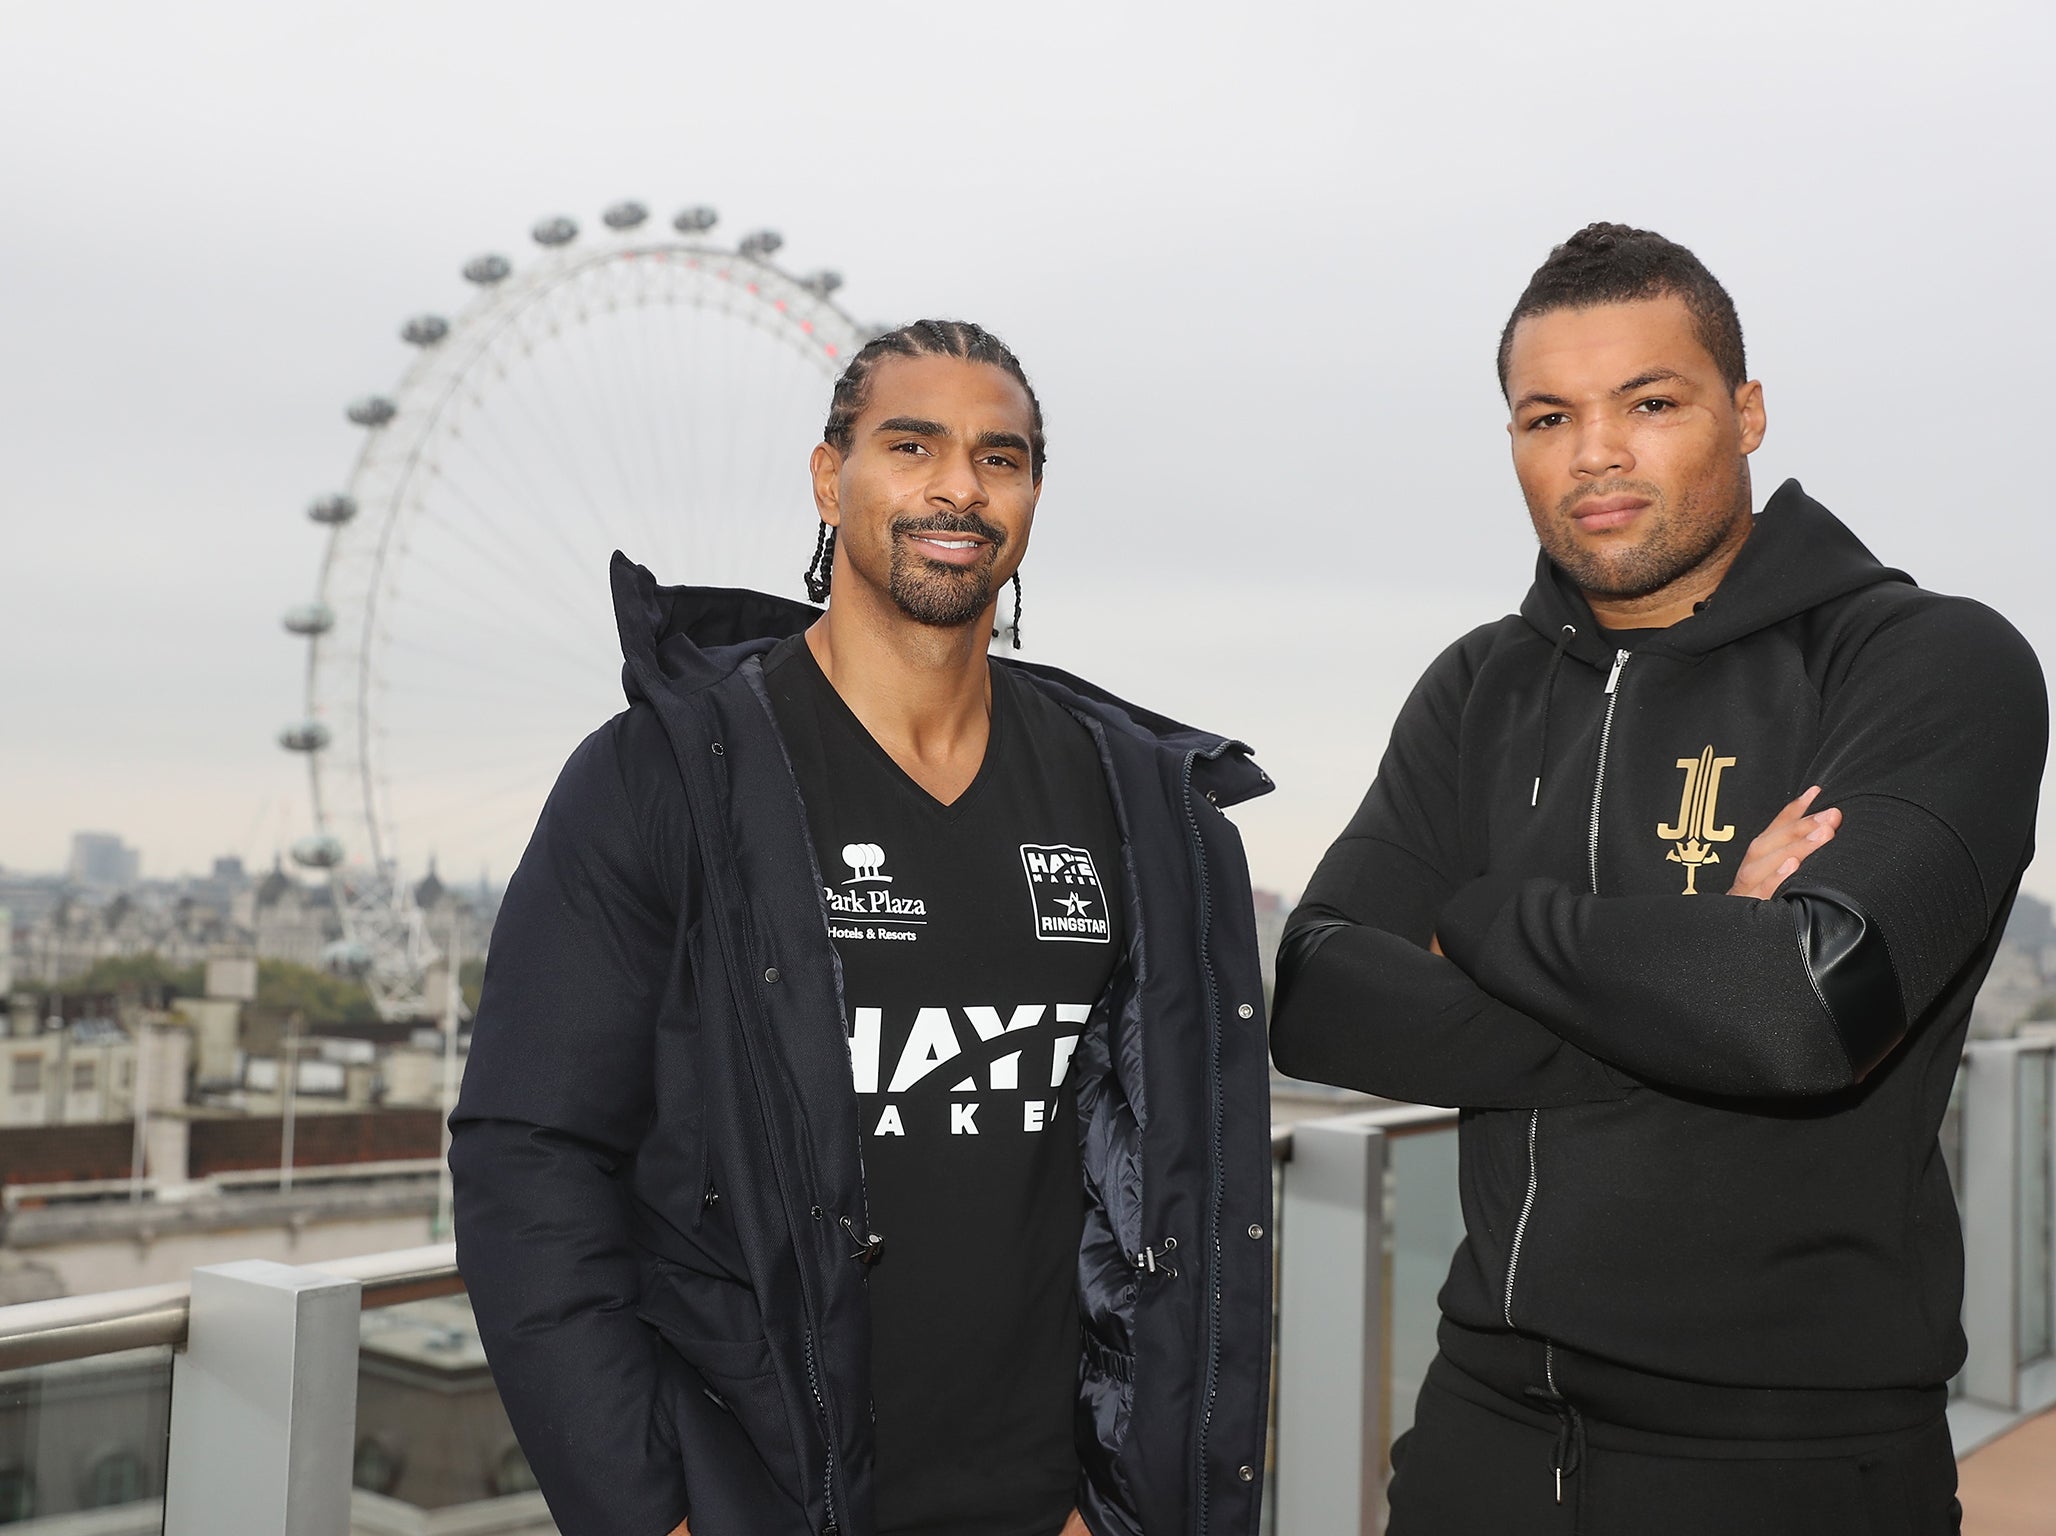 Haye is already preparing for life after boxing